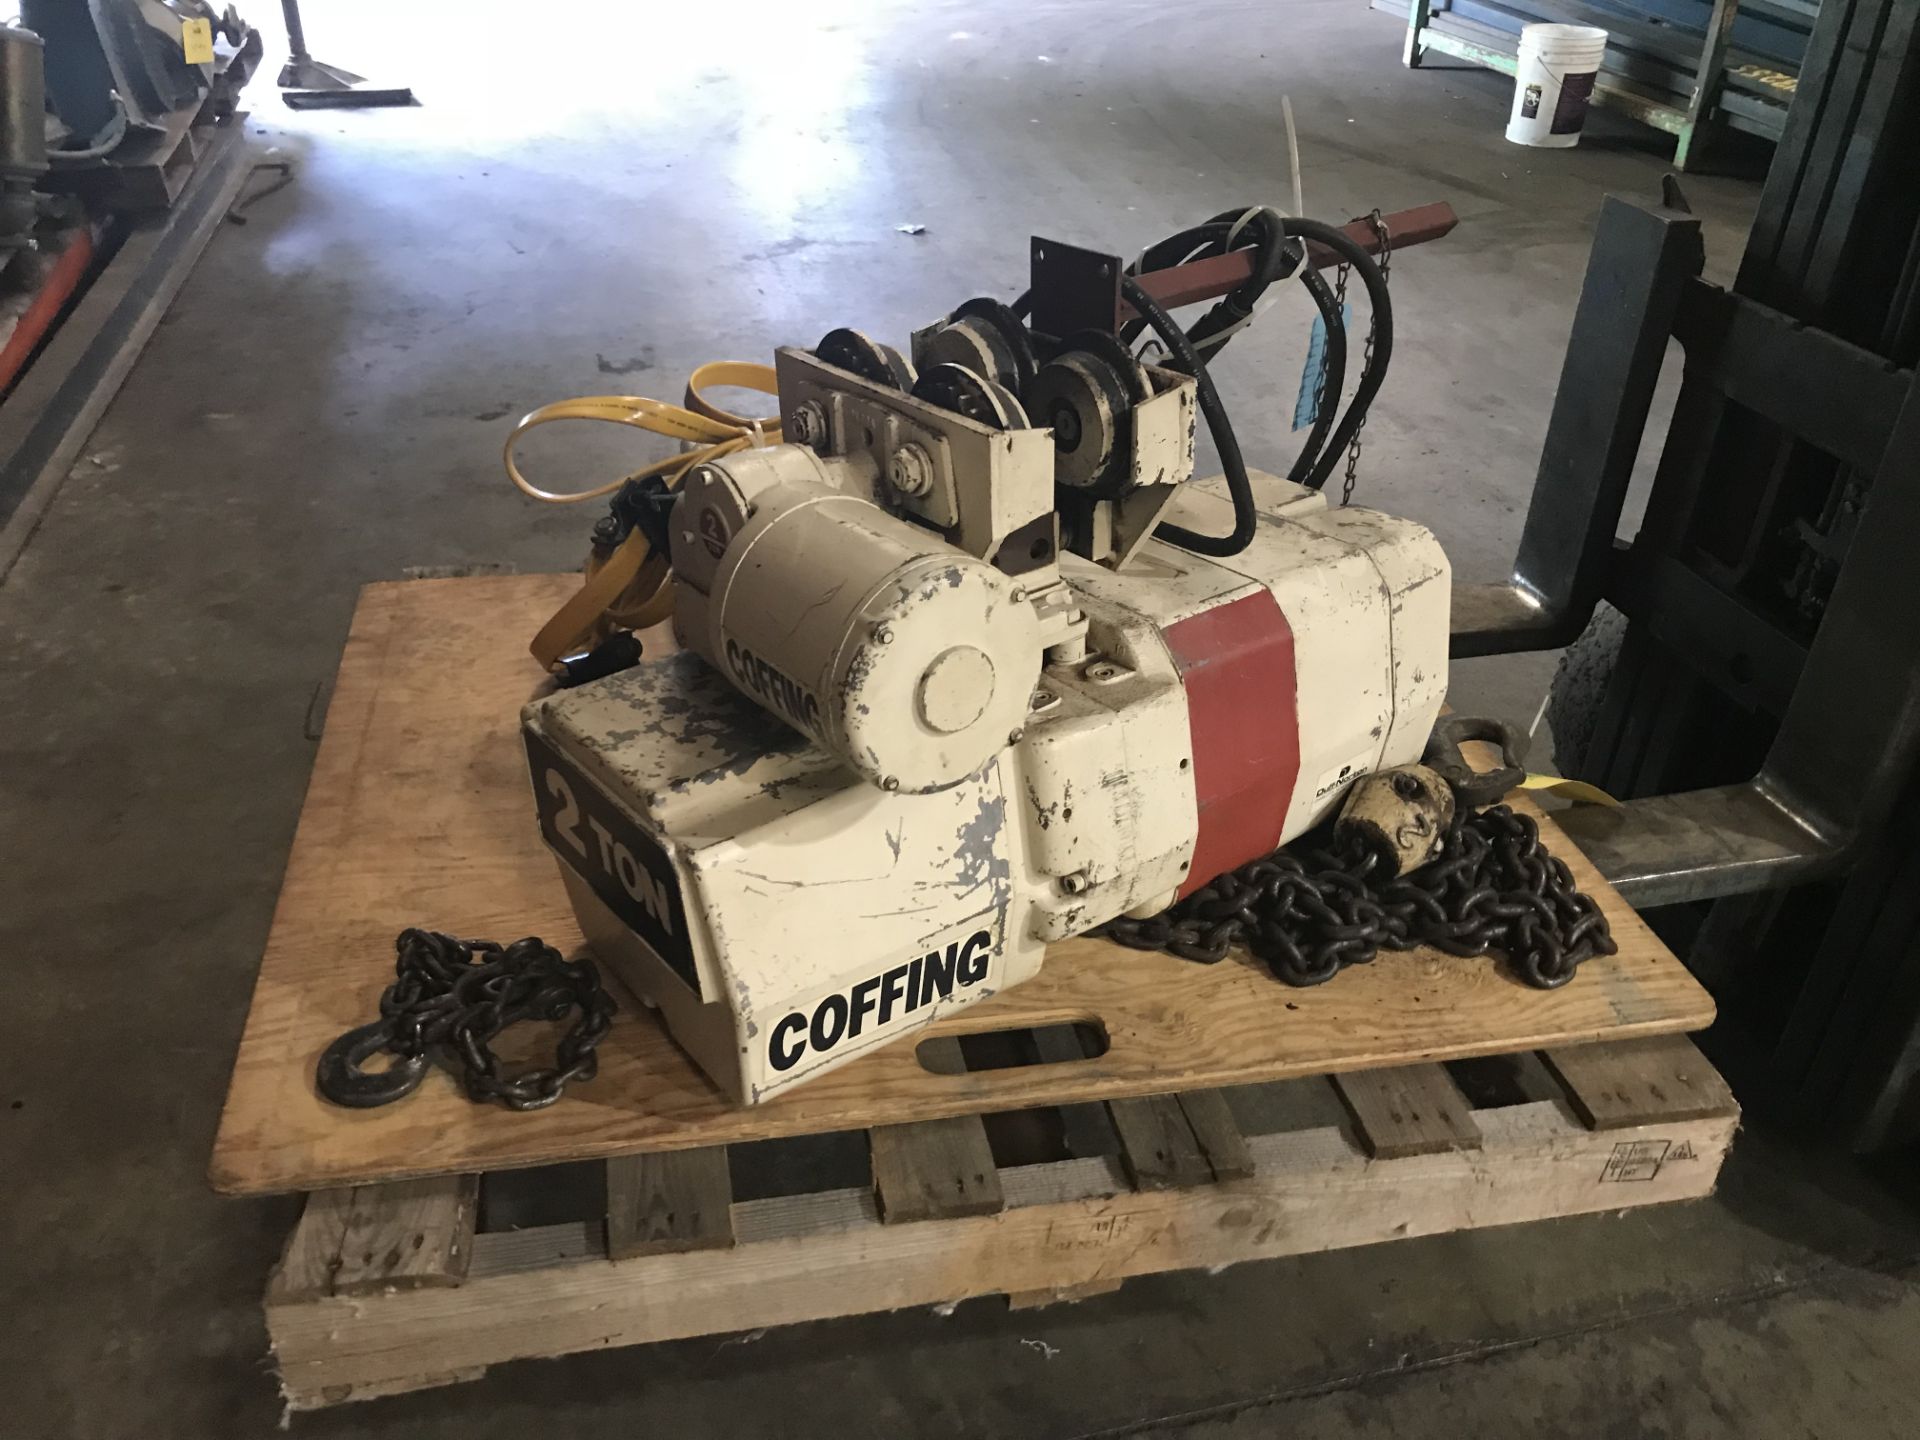 Coffing 2 Ton Chain Hoist, Rigging Fee For This Item Is $30